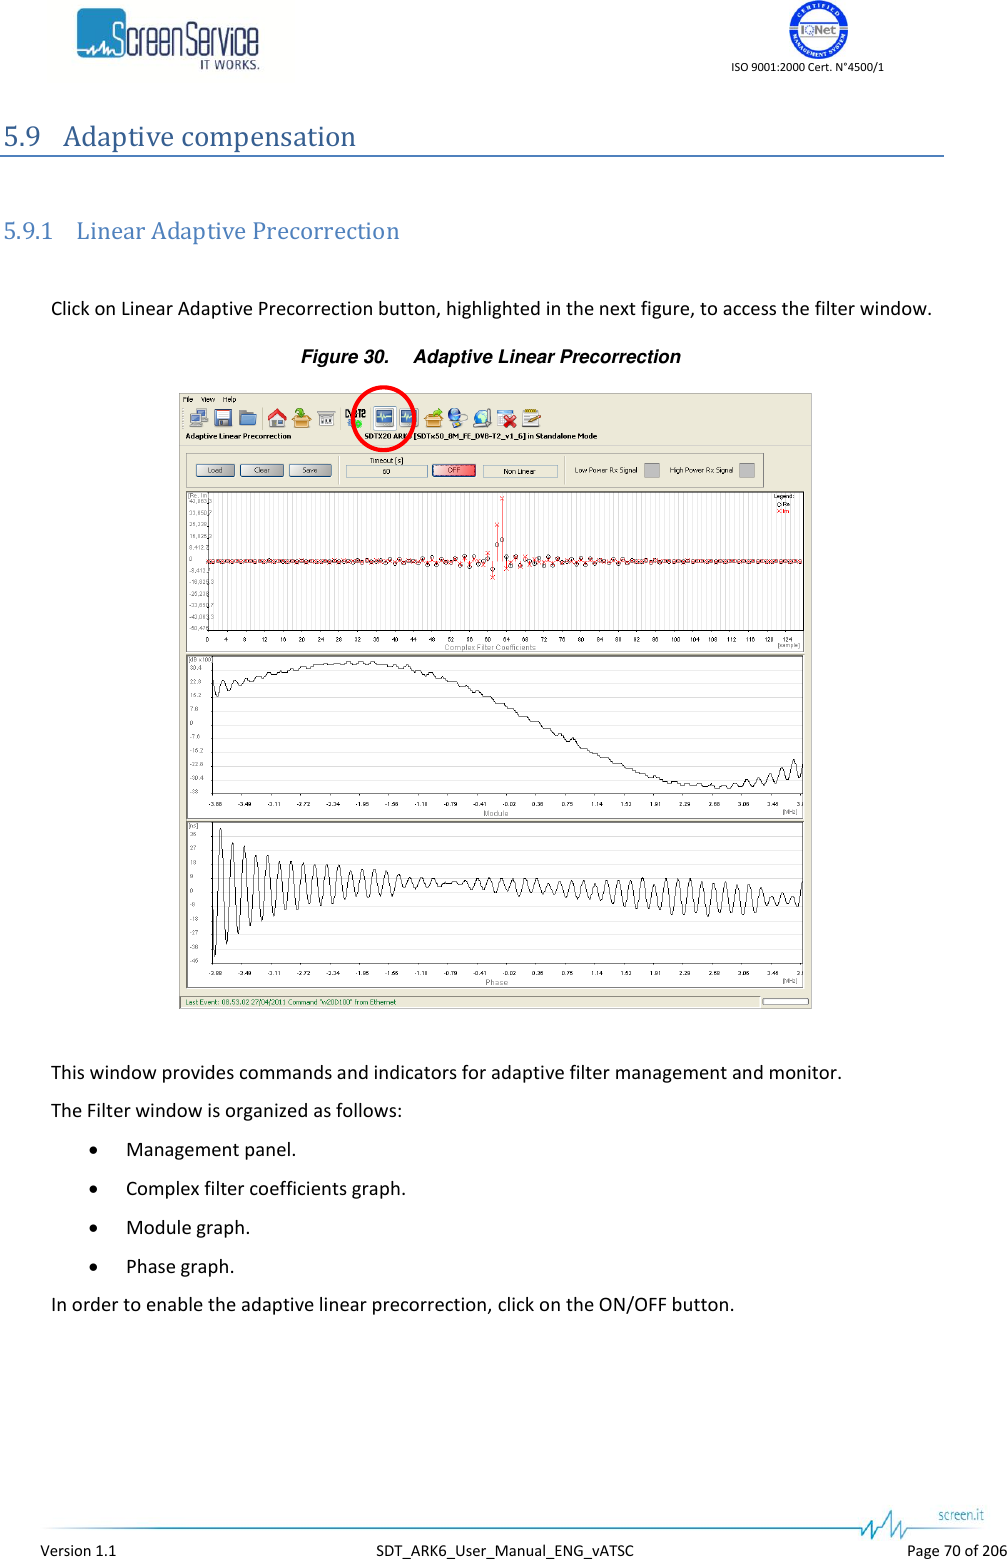    ISO 9001:2000 Cert. N°4500/1   Version 1.1  SDT_ARK6_User_Manual_ENG_vATSC  Page 70 of 206 5.9 Adaptive compensation  5.9.1 Linear Adaptive Precorrection  Click on Linear Adaptive Precorrection button, highlighted in the next figure, to access the filter window. Figure 30. Adaptive Linear Precorrection   This window provides commands and indicators for adaptive filter management and monitor.  The Filter window is organized as follows:  Management panel.  Complex filter coefficients graph.  Module graph.  Phase graph. In order to enable the adaptive linear precorrection, click on the ON/OFF button.  